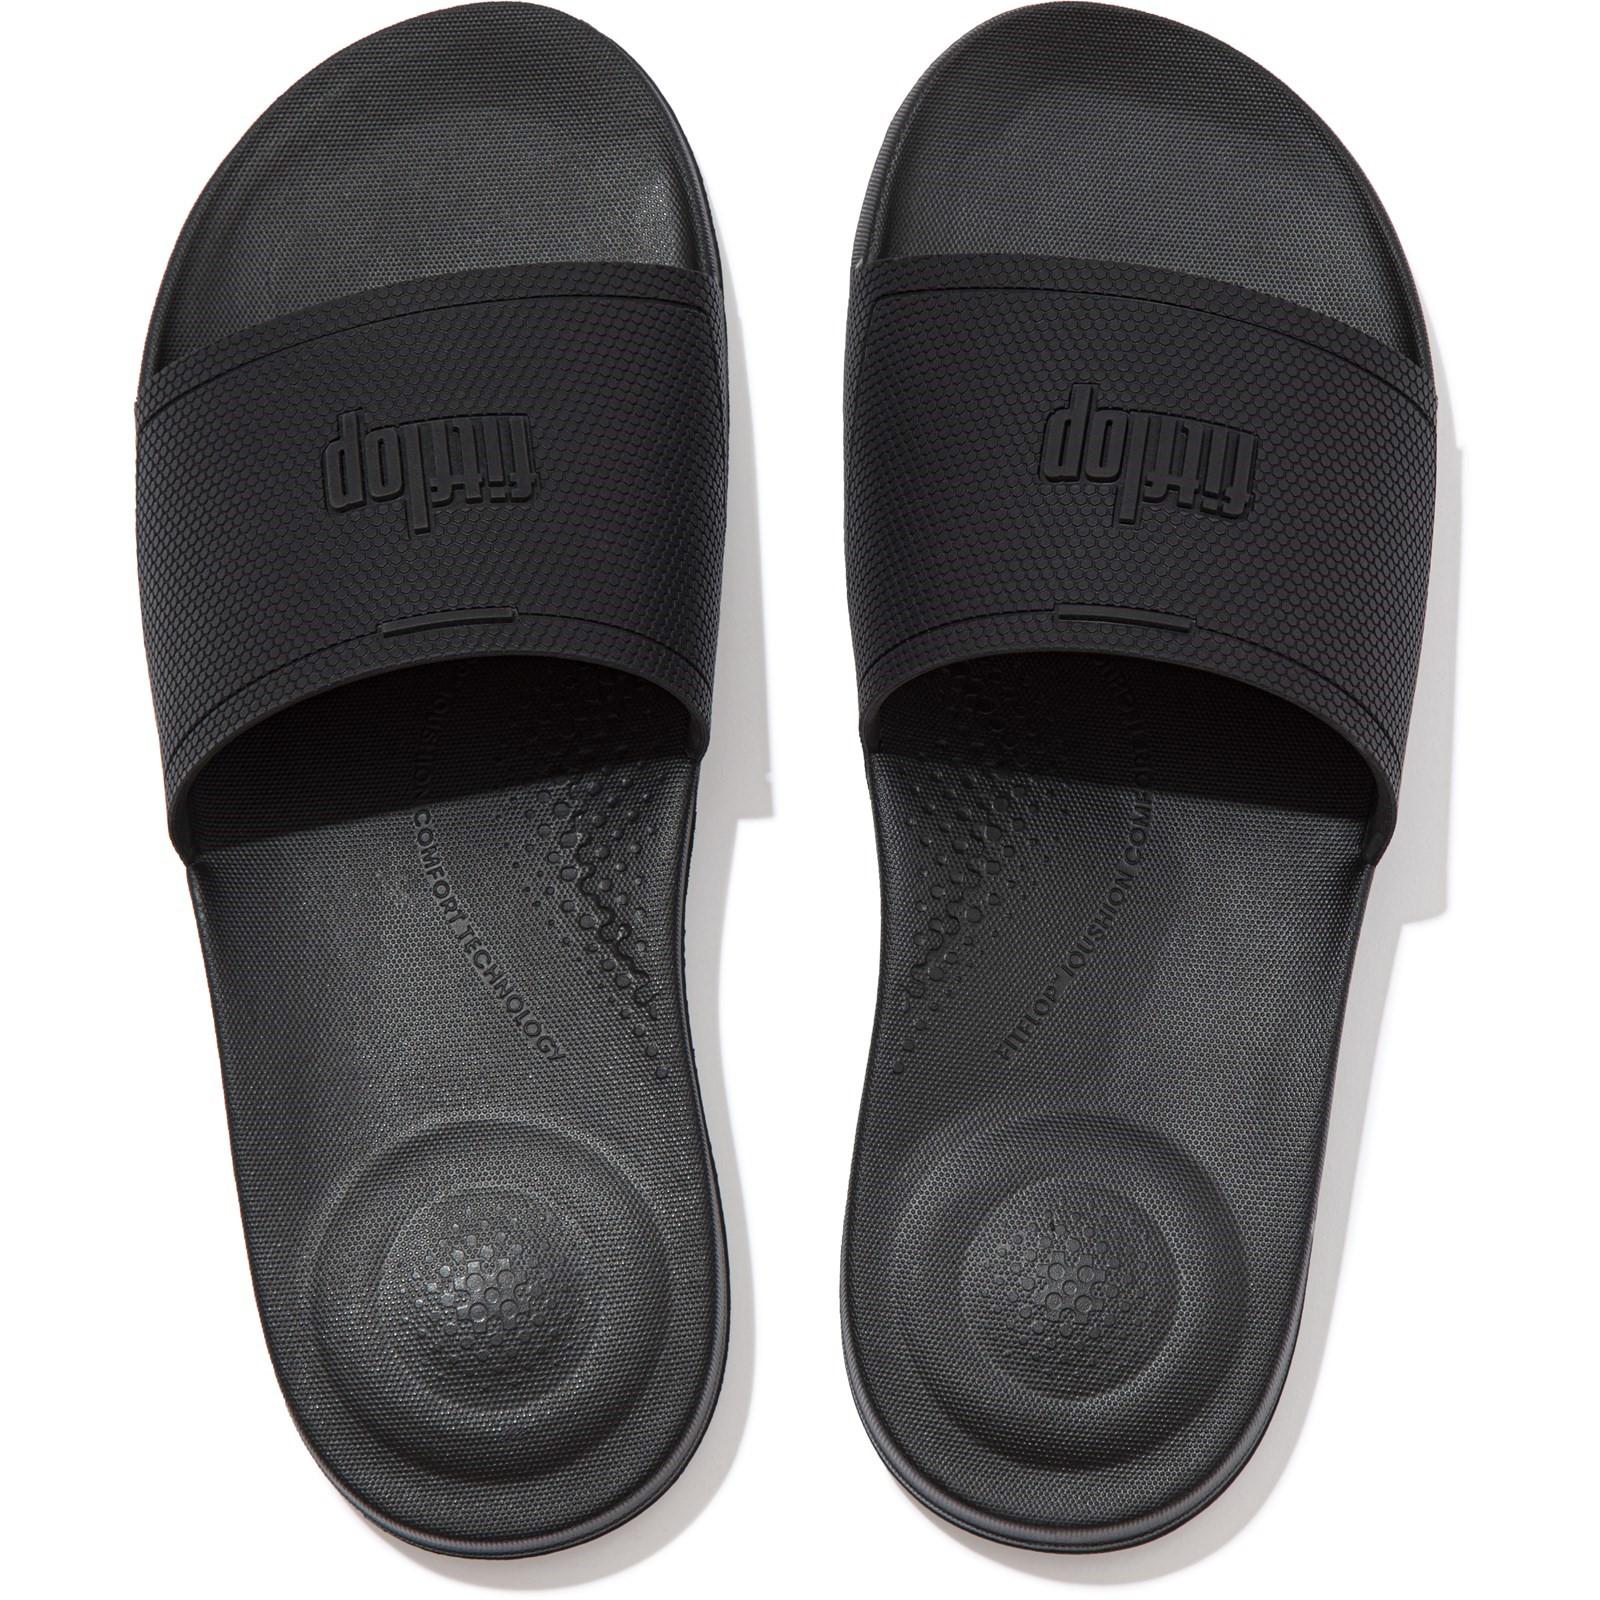 Fitflop iQUSHION Sliders Sandals